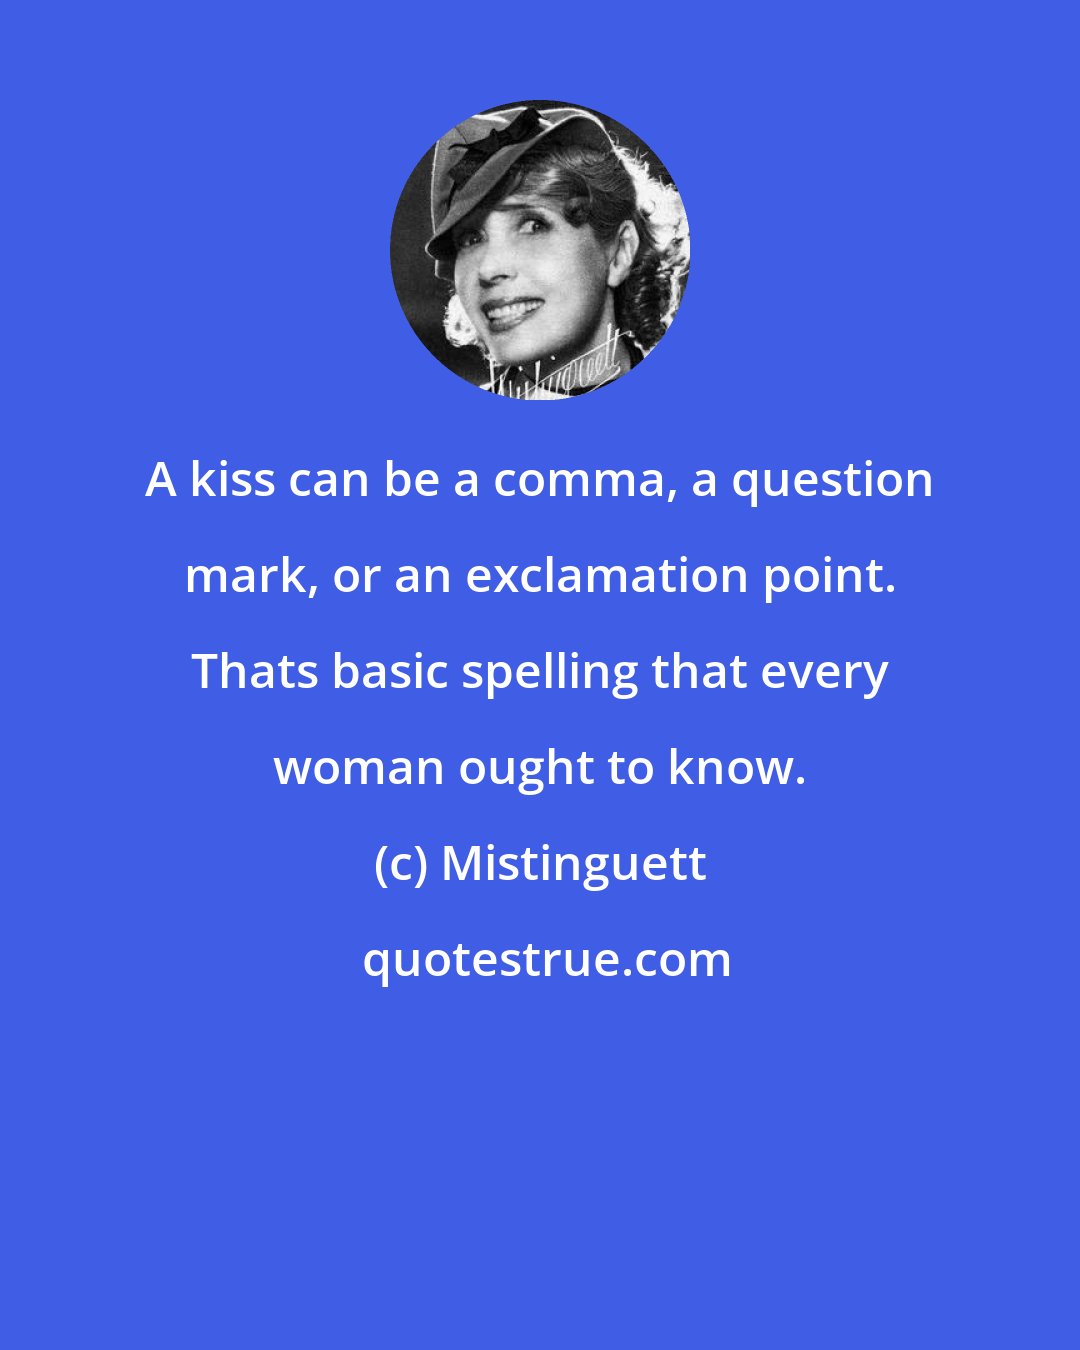 Mistinguett: A kiss can be a comma, a question mark, or an exclamation point. Thats basic spelling that every woman ought to know.